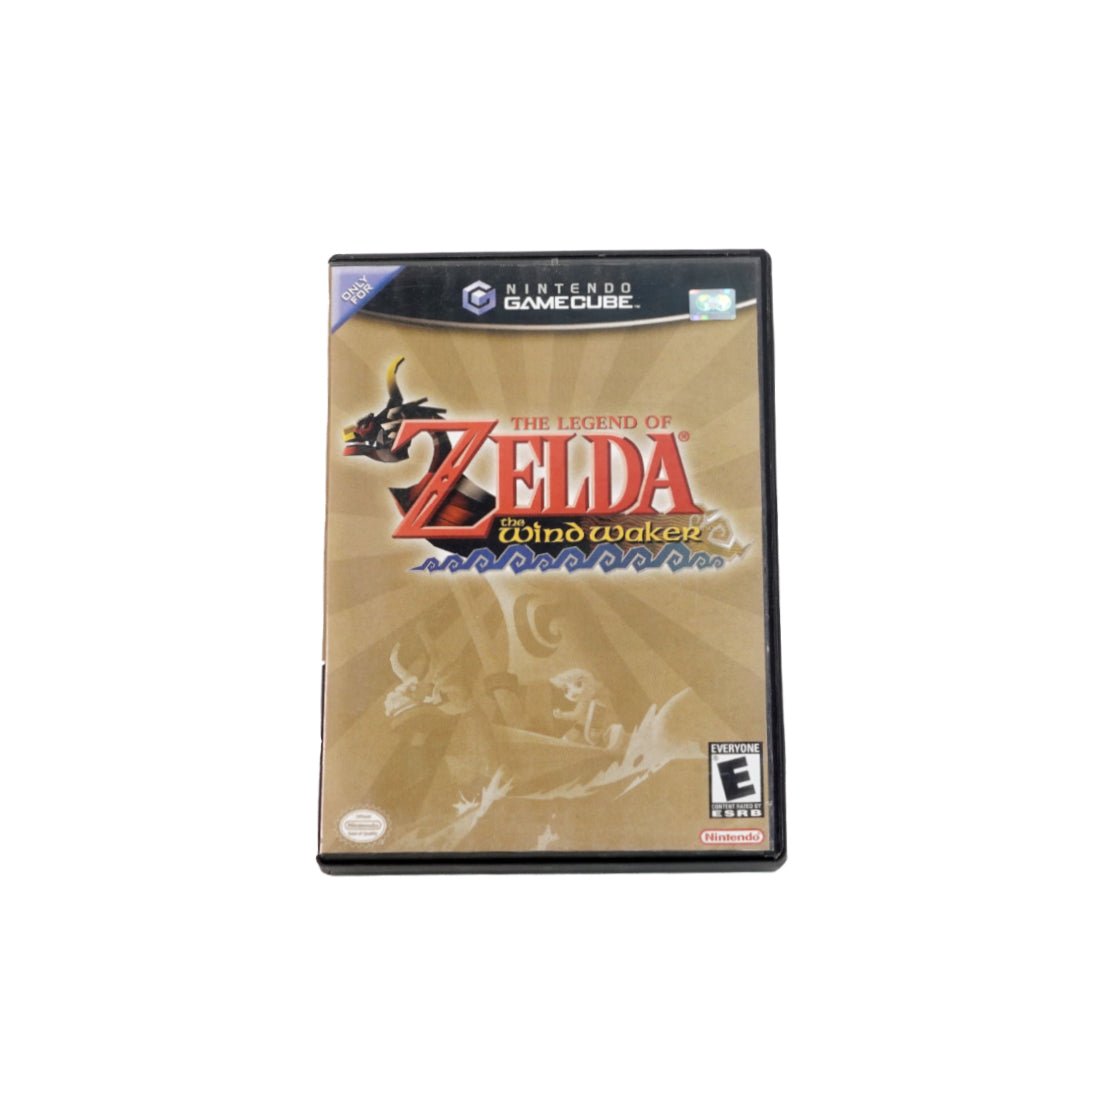 (Pre-Owned) The Legend of Zelda The Wind Maker - Nintendo Gamecube - Store 974 | ستور ٩٧٤